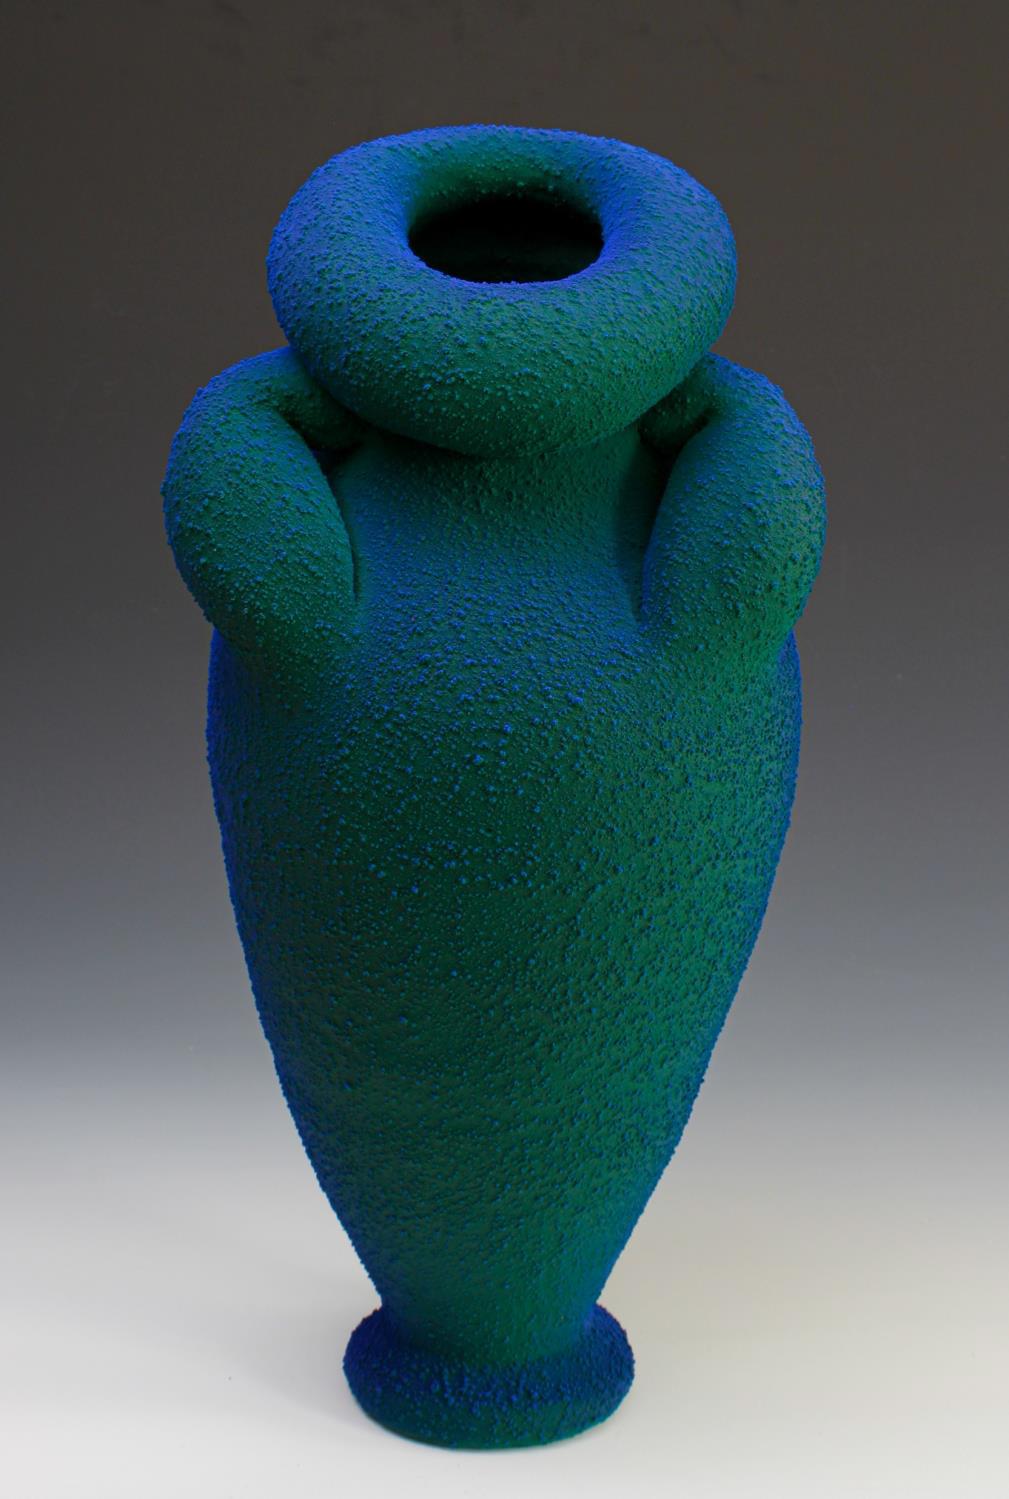 Maxwell Mustardo Abstract Sculpture - "Green & Blue 08", Mixed Media Ceramic Sculpture with PVC Flocked Surface